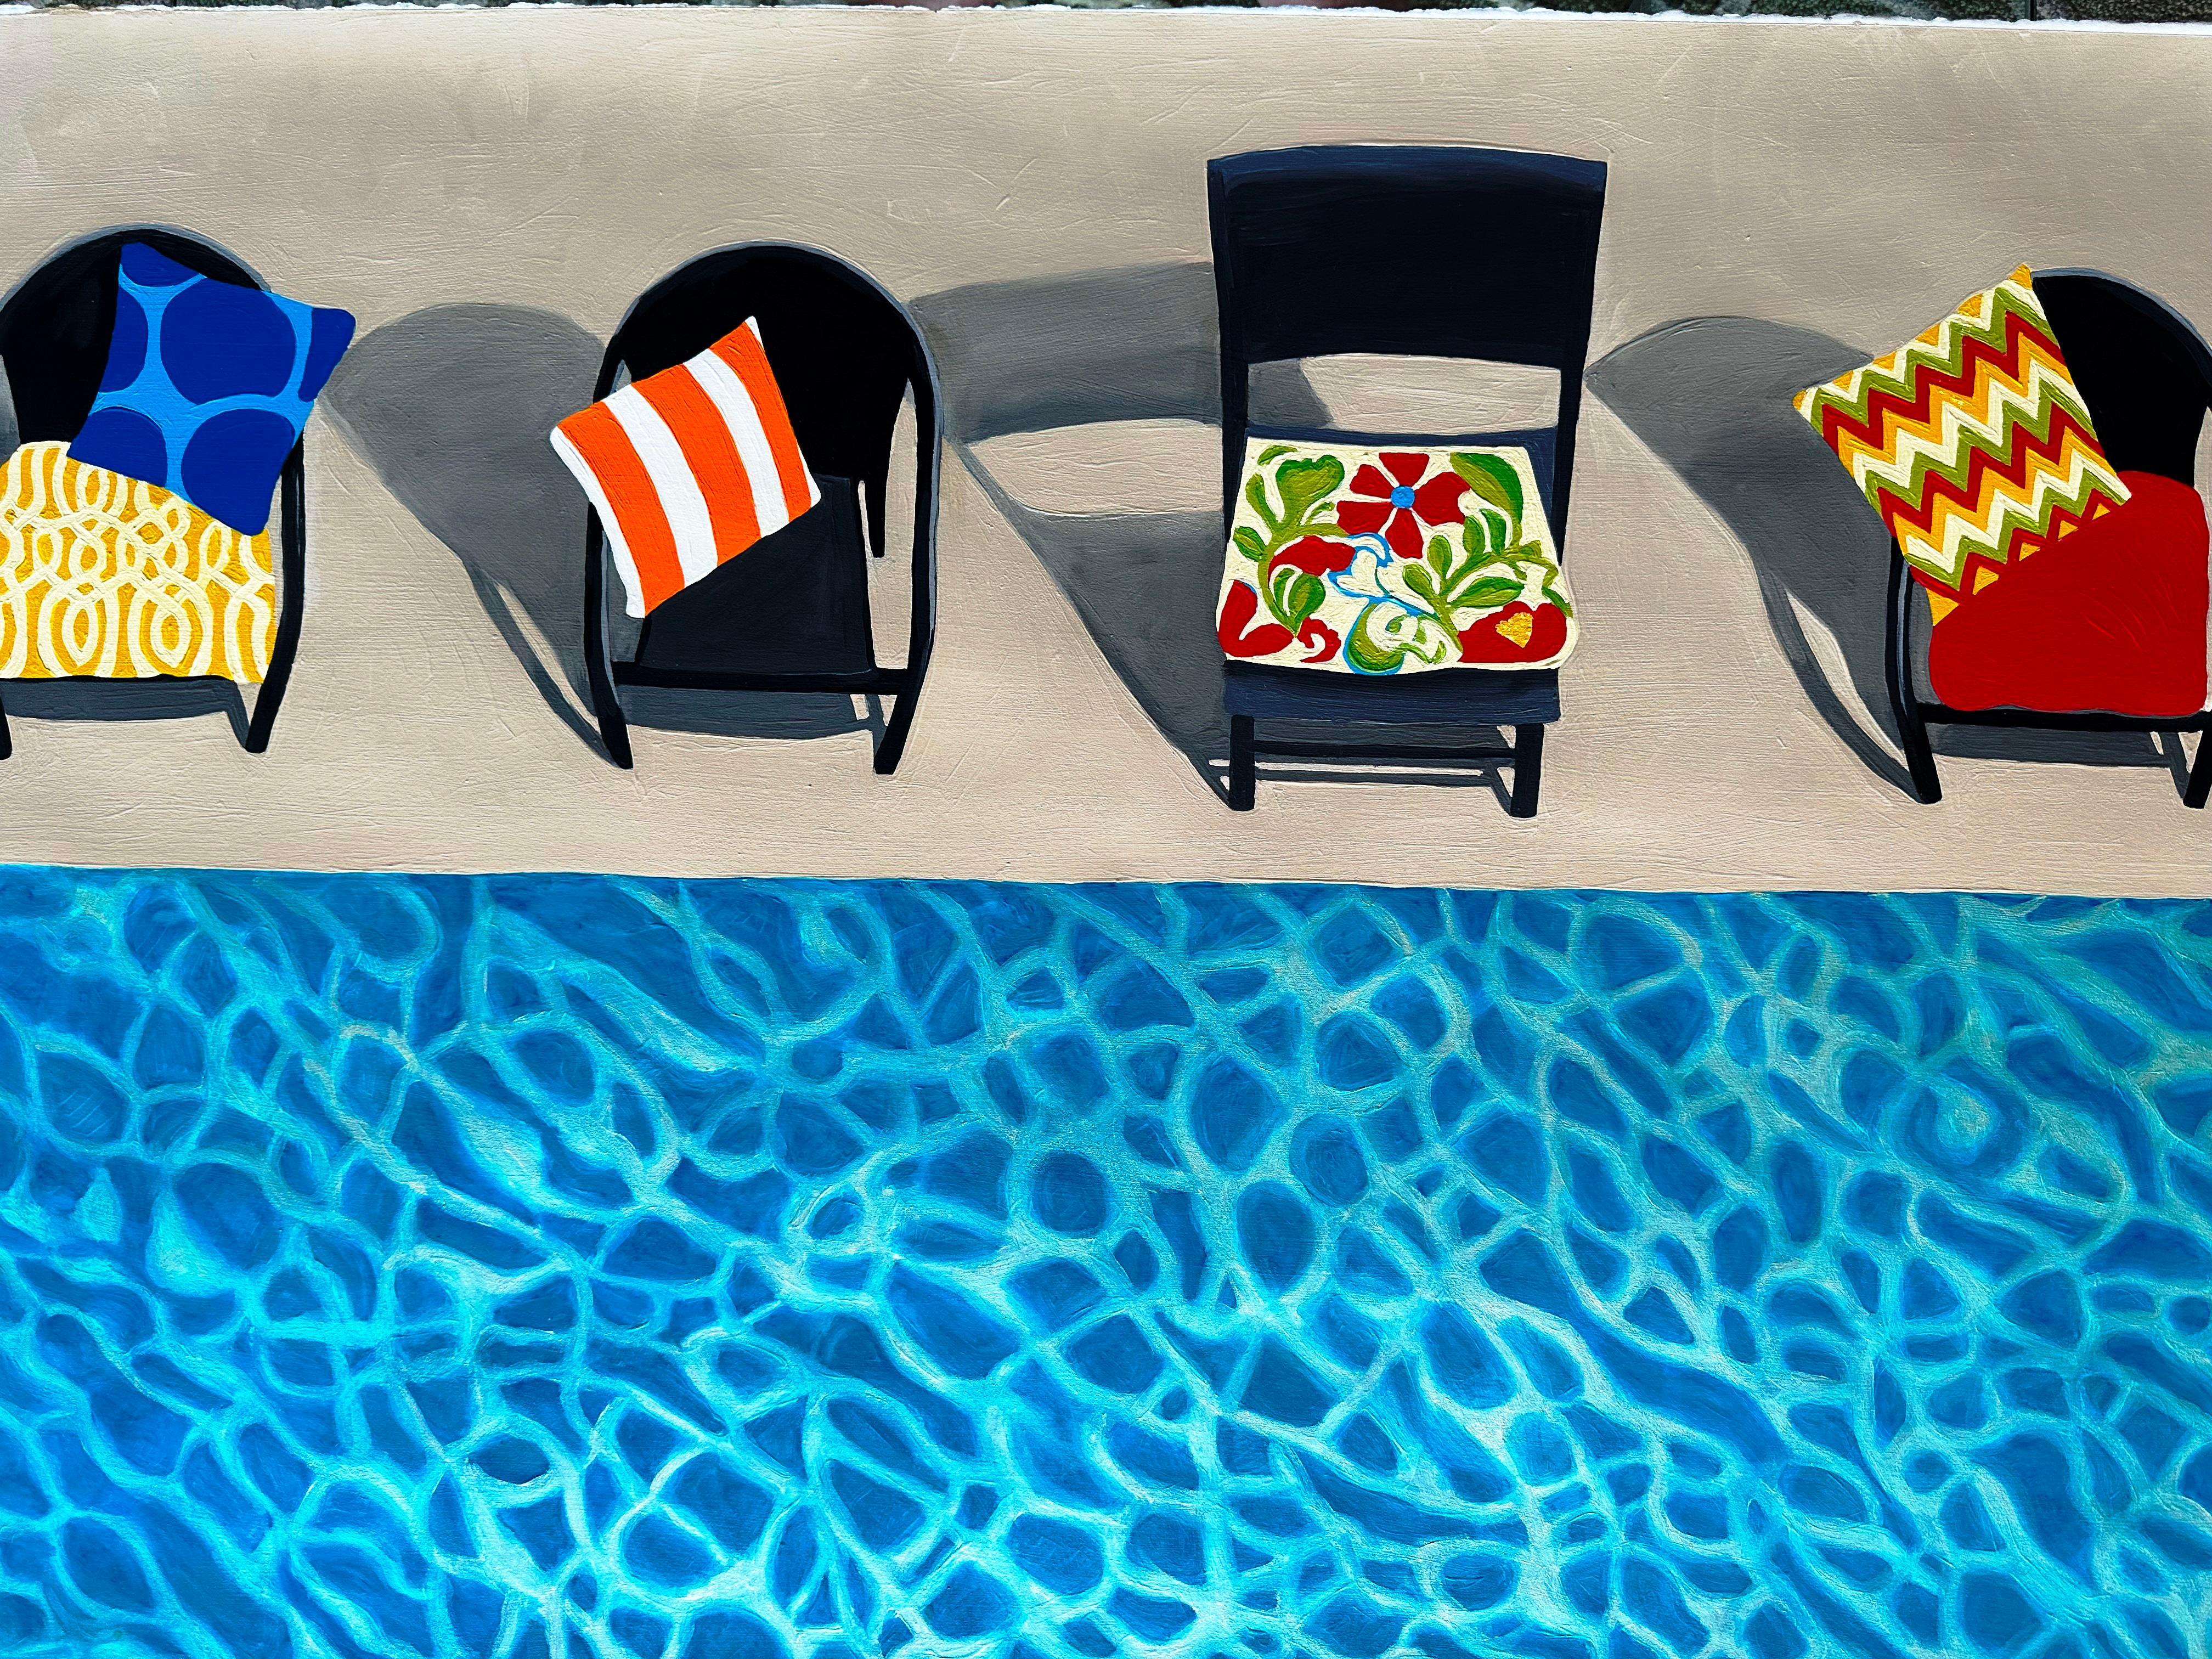 Four Chairs at Poolside